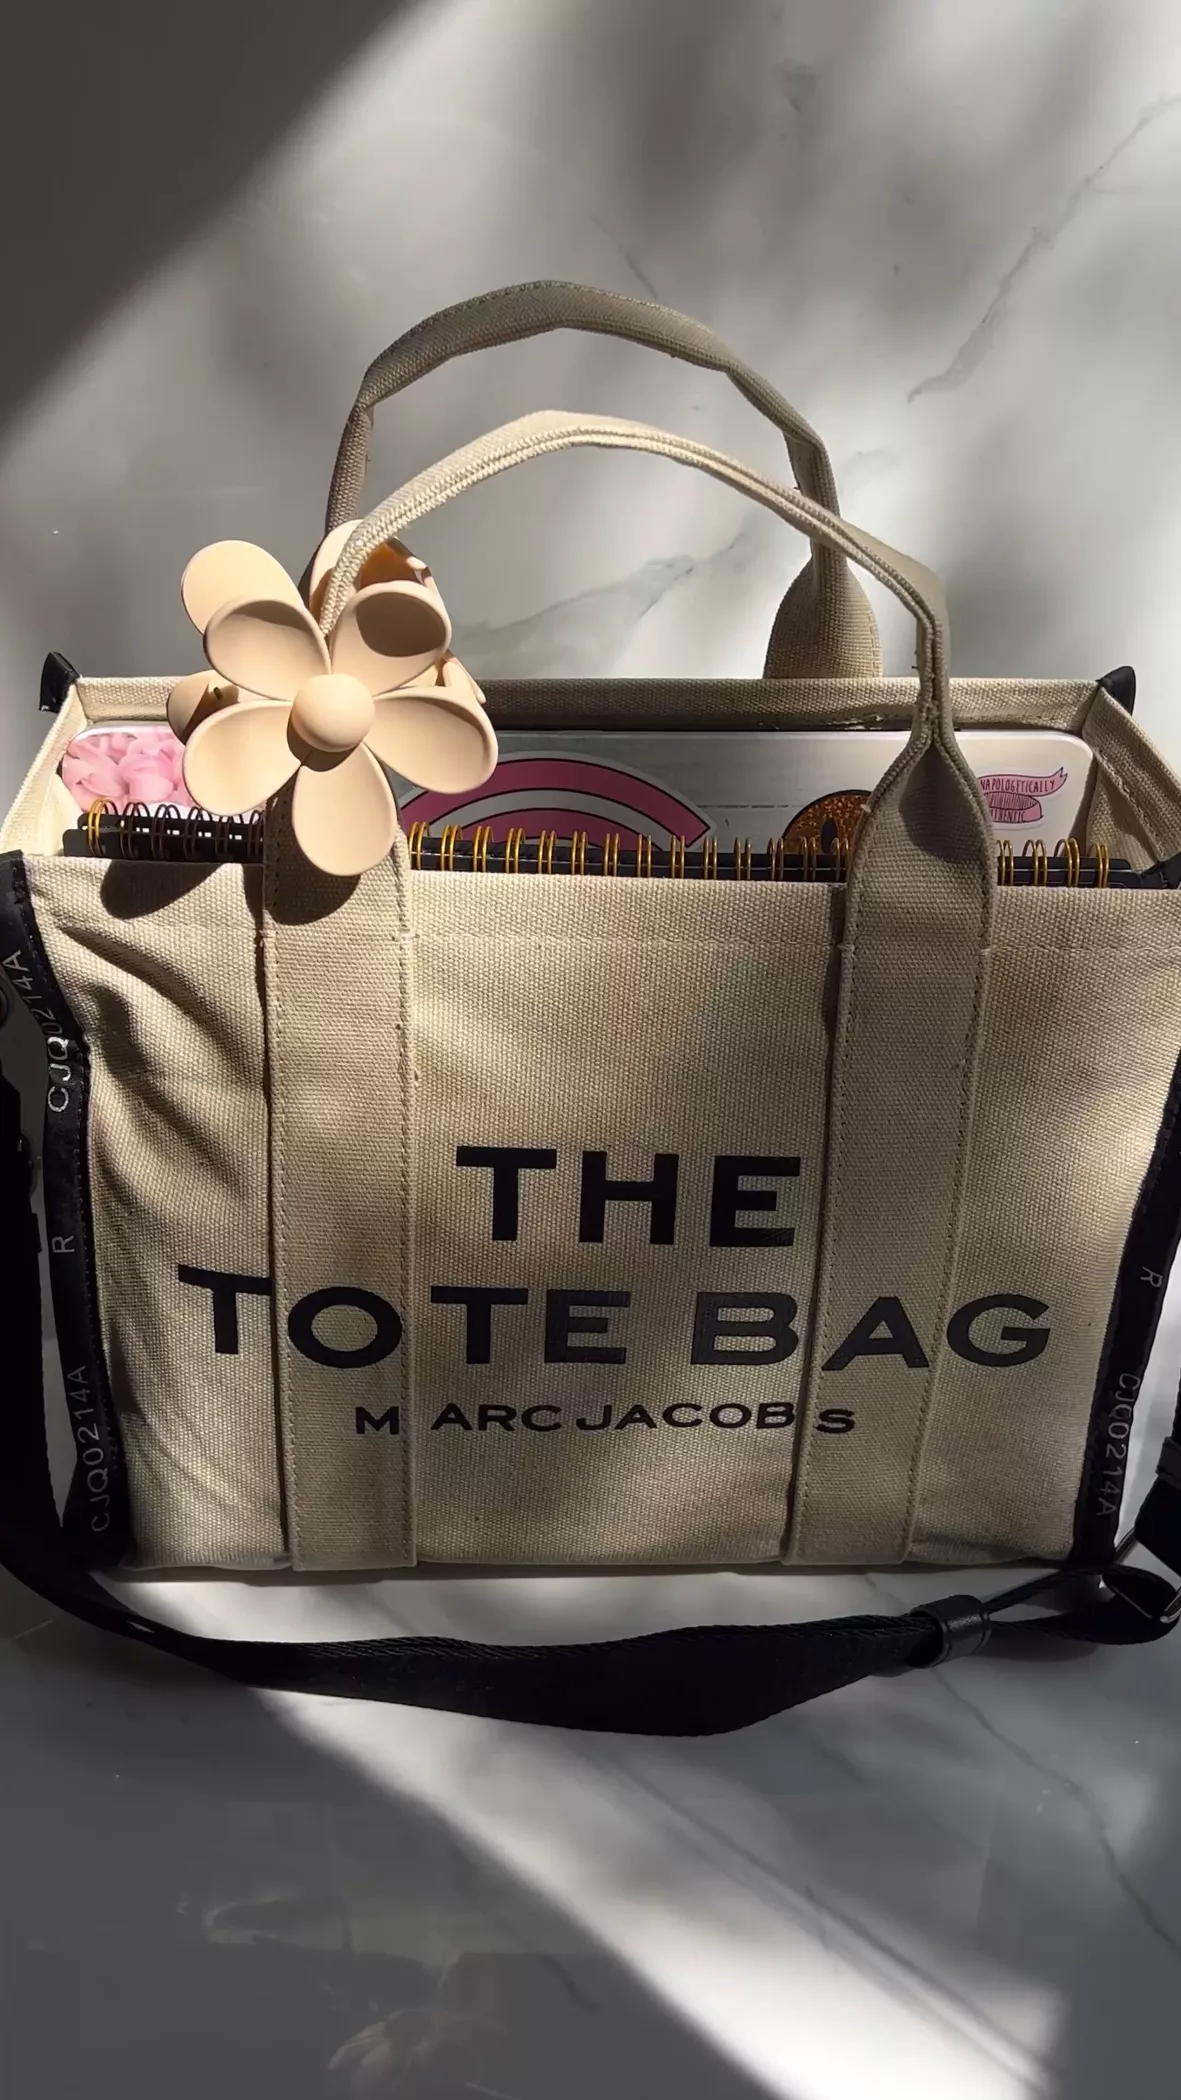 looking for good quality tote bags : r/DHgate